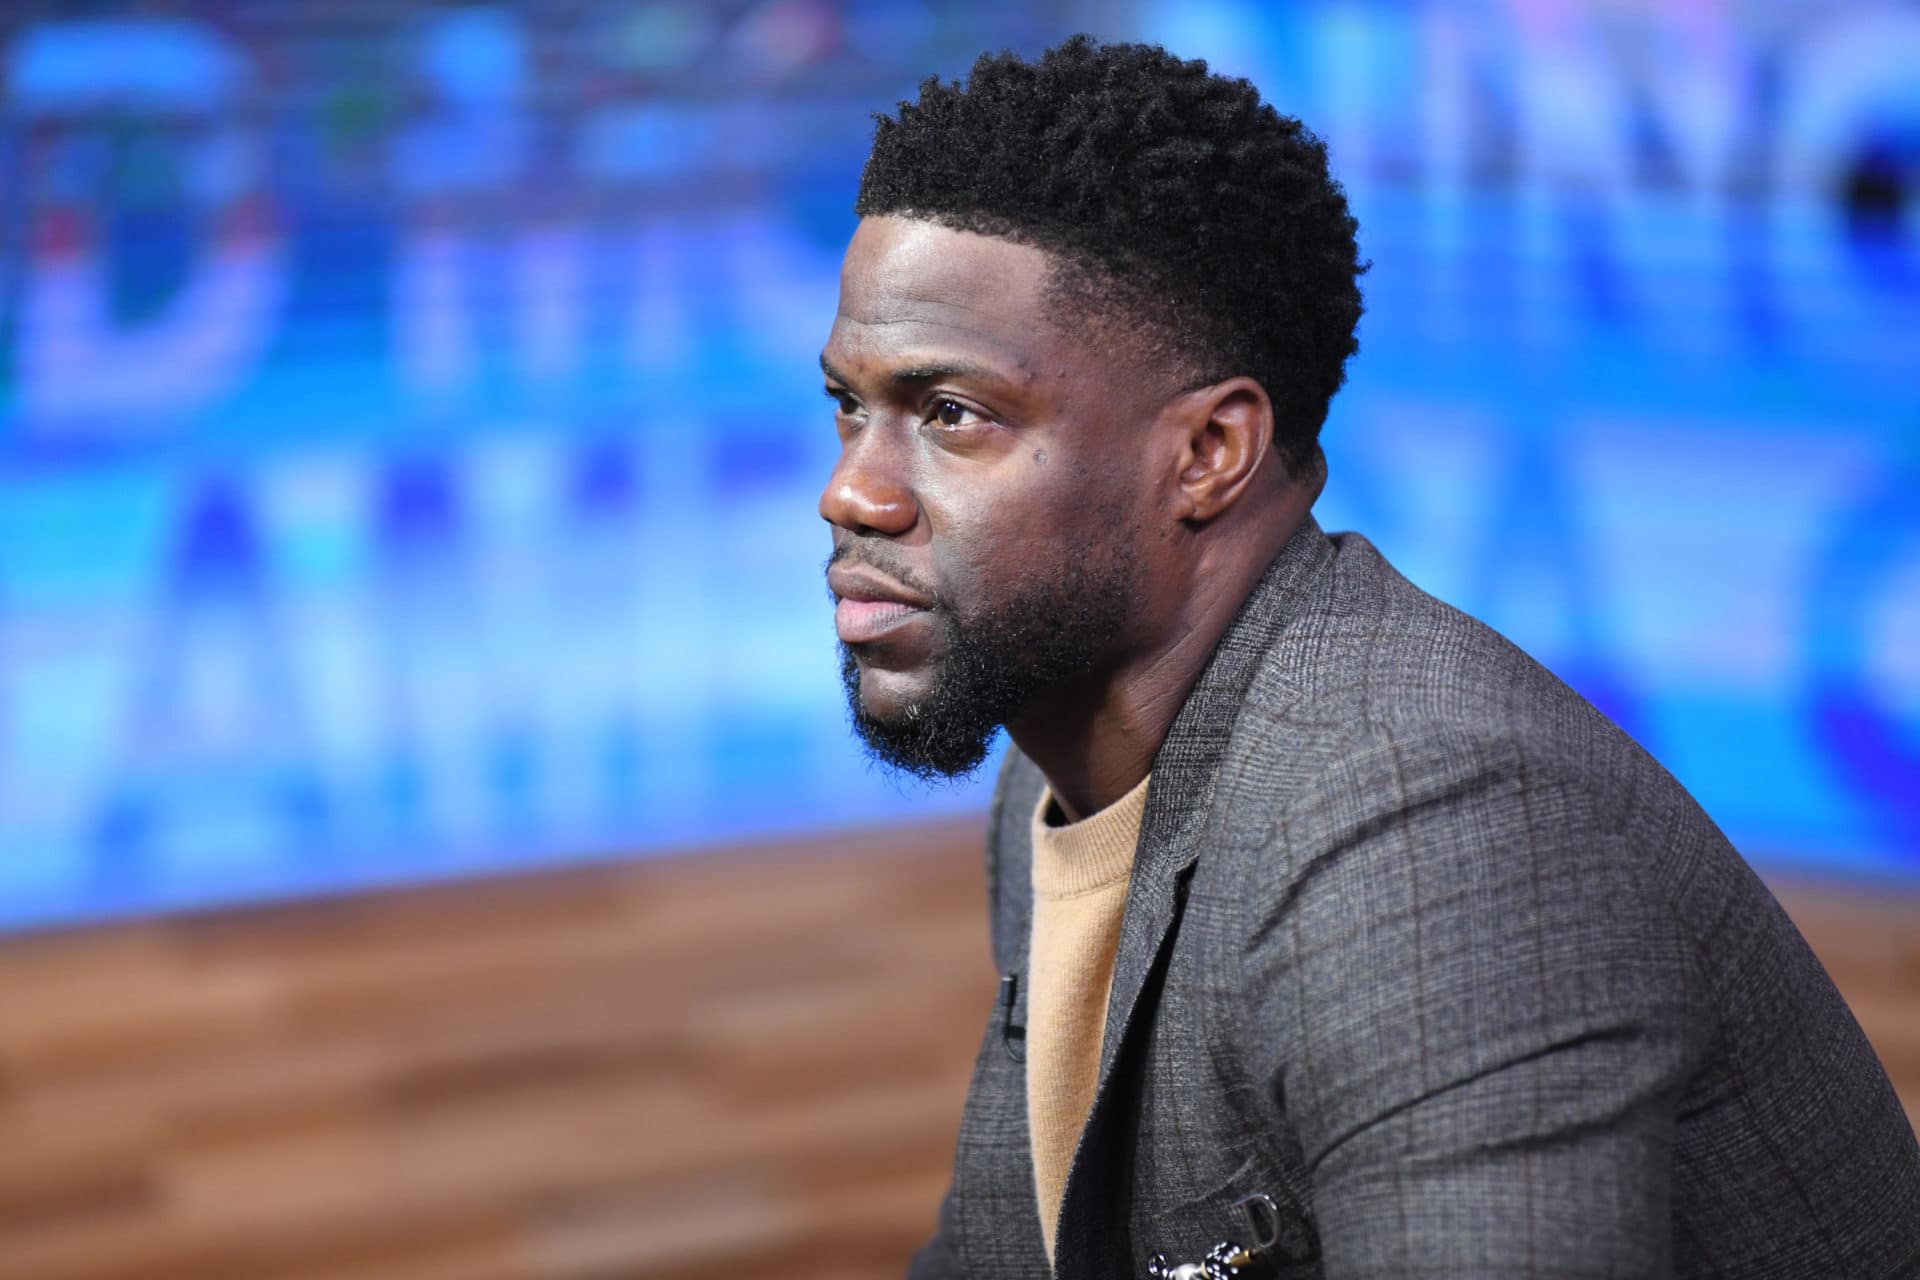 Kevin Hart Plans To Turn Oscars Drama Into Stand-Up Comedy Material For New Special